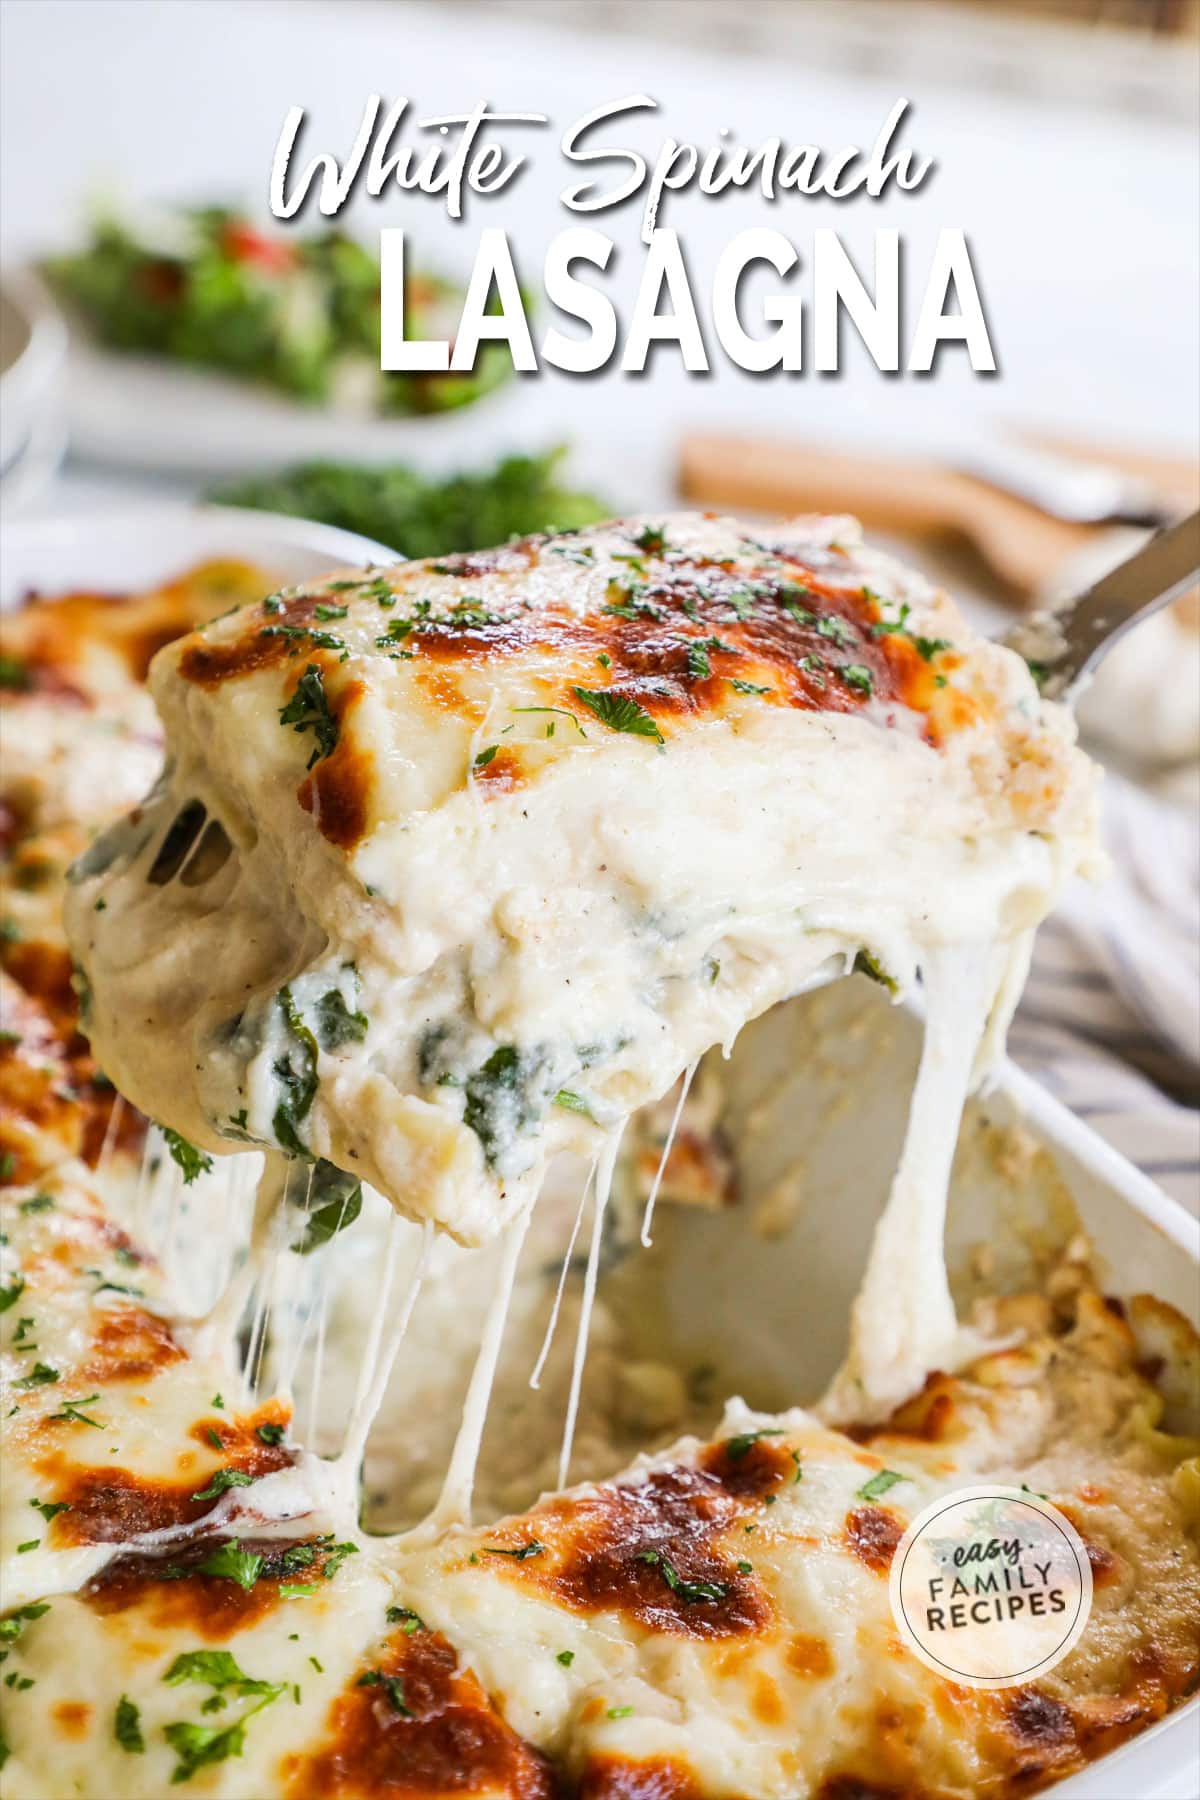 White vegetable lasagna showing layers of noodles, white sauce, and cheese as it is lifted out of a dish